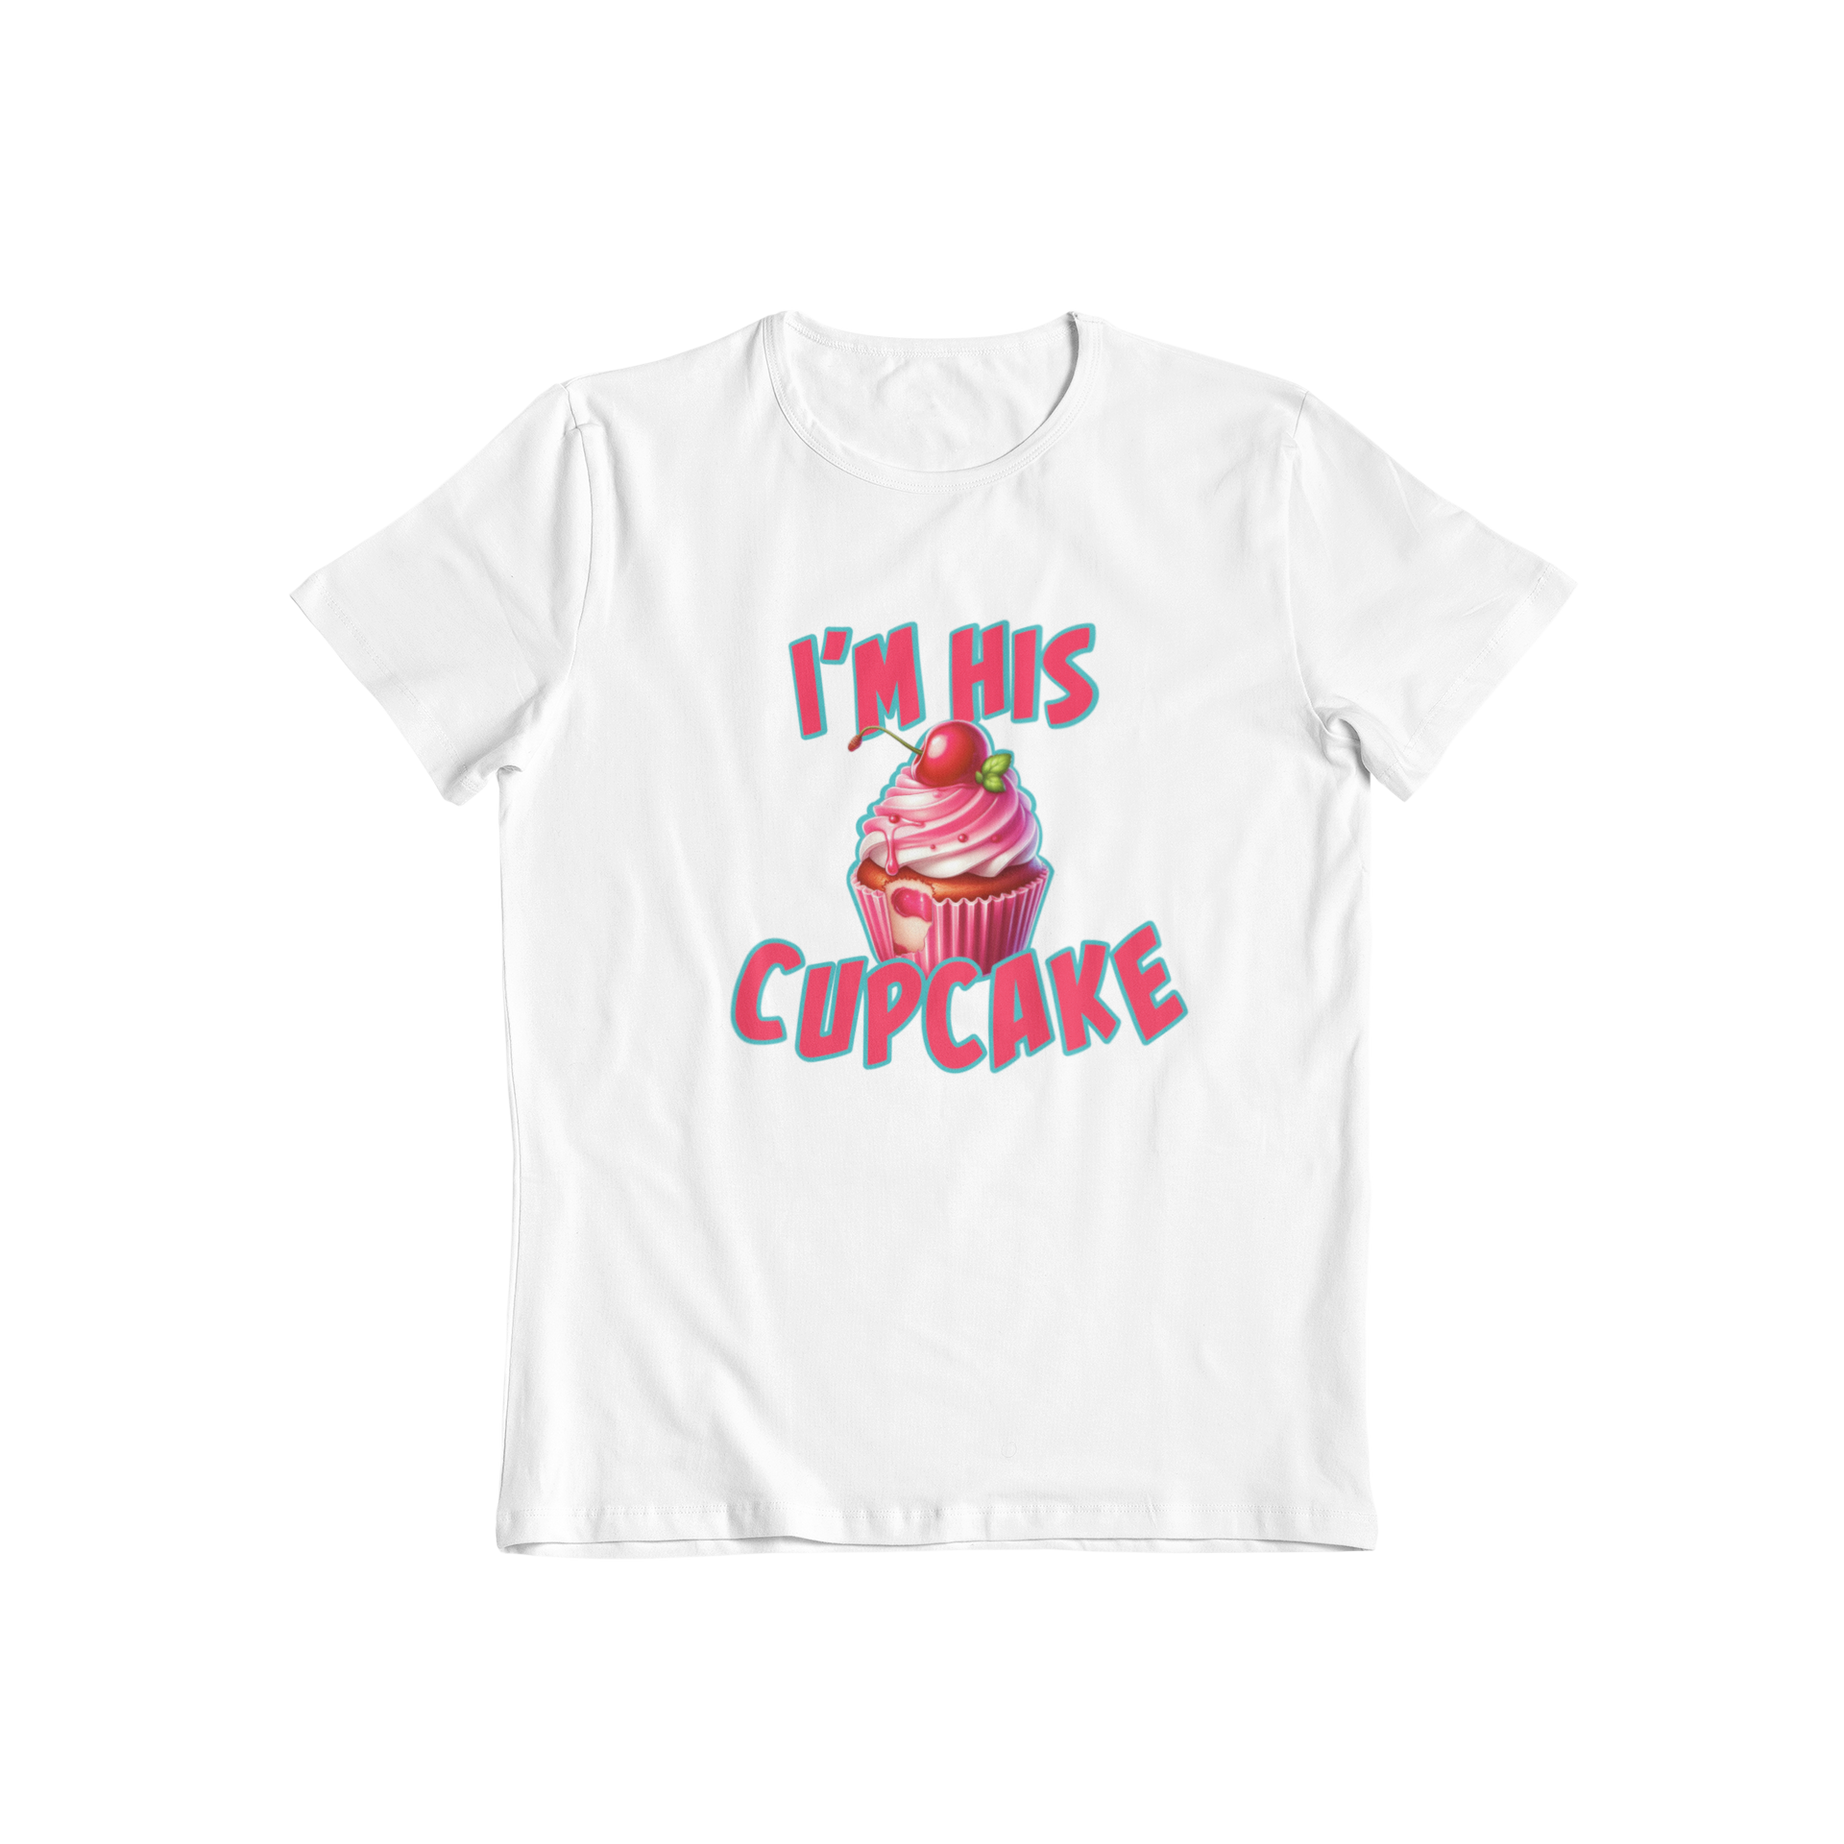 This graphic matching Cupcake T-shirt is perfect for any sweet couple. Made with high-quality materials, it will match perfectly with our Stud Muffin T-shirt for a coordinated look. Show off your love in style with this adorable and comfortable shirt!